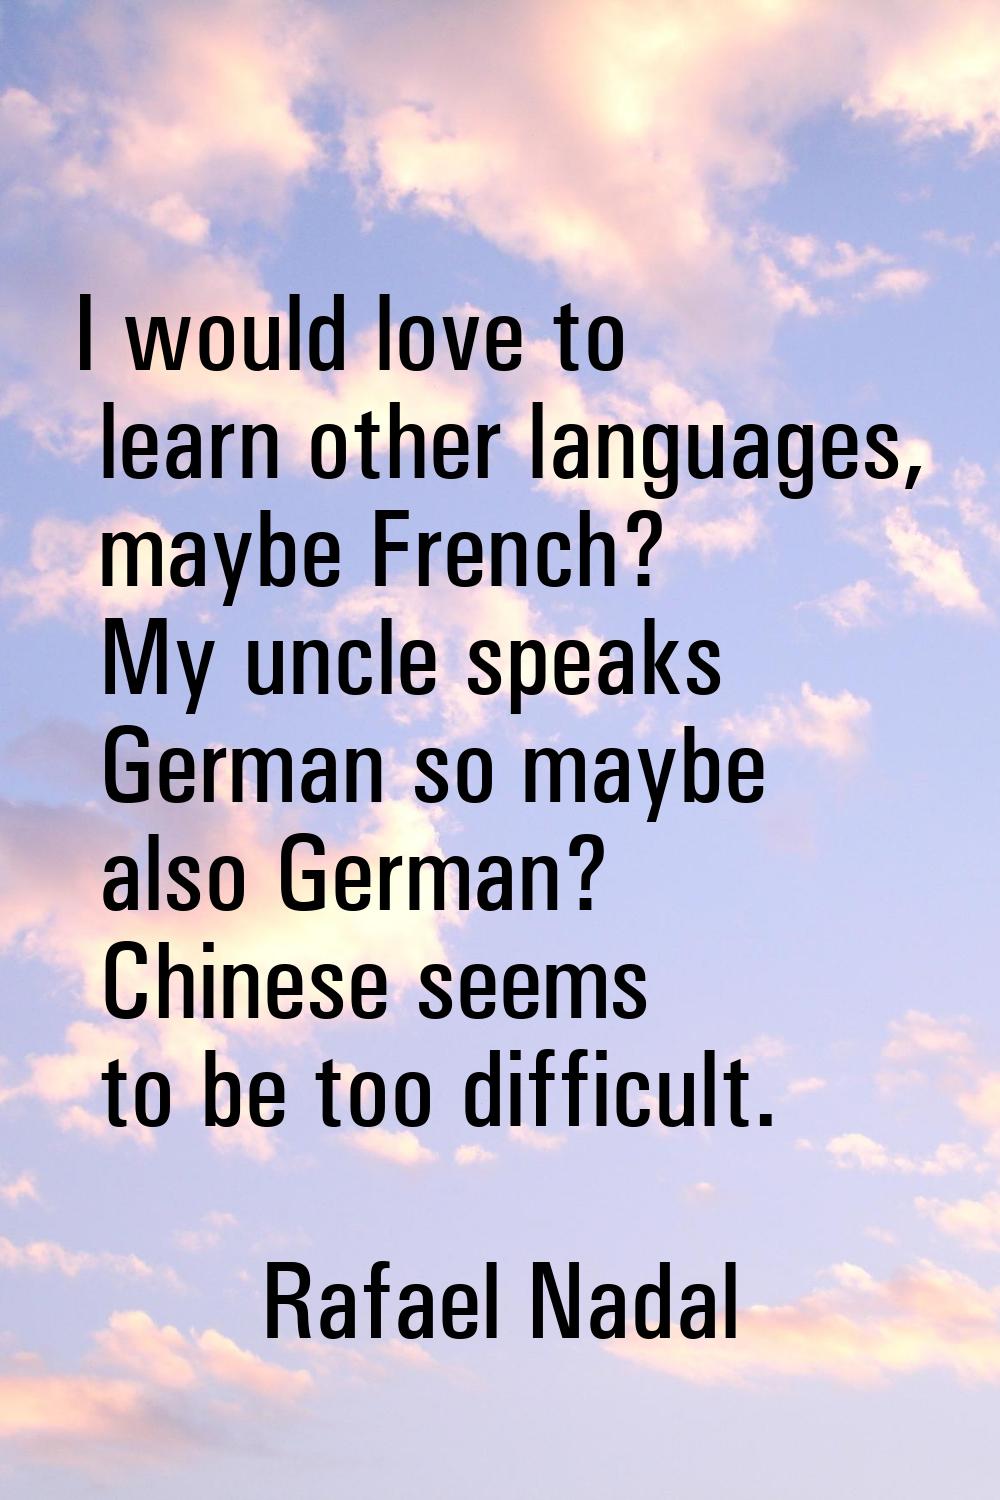 I would love to learn other languages, maybe French? My uncle speaks German so maybe also German? C